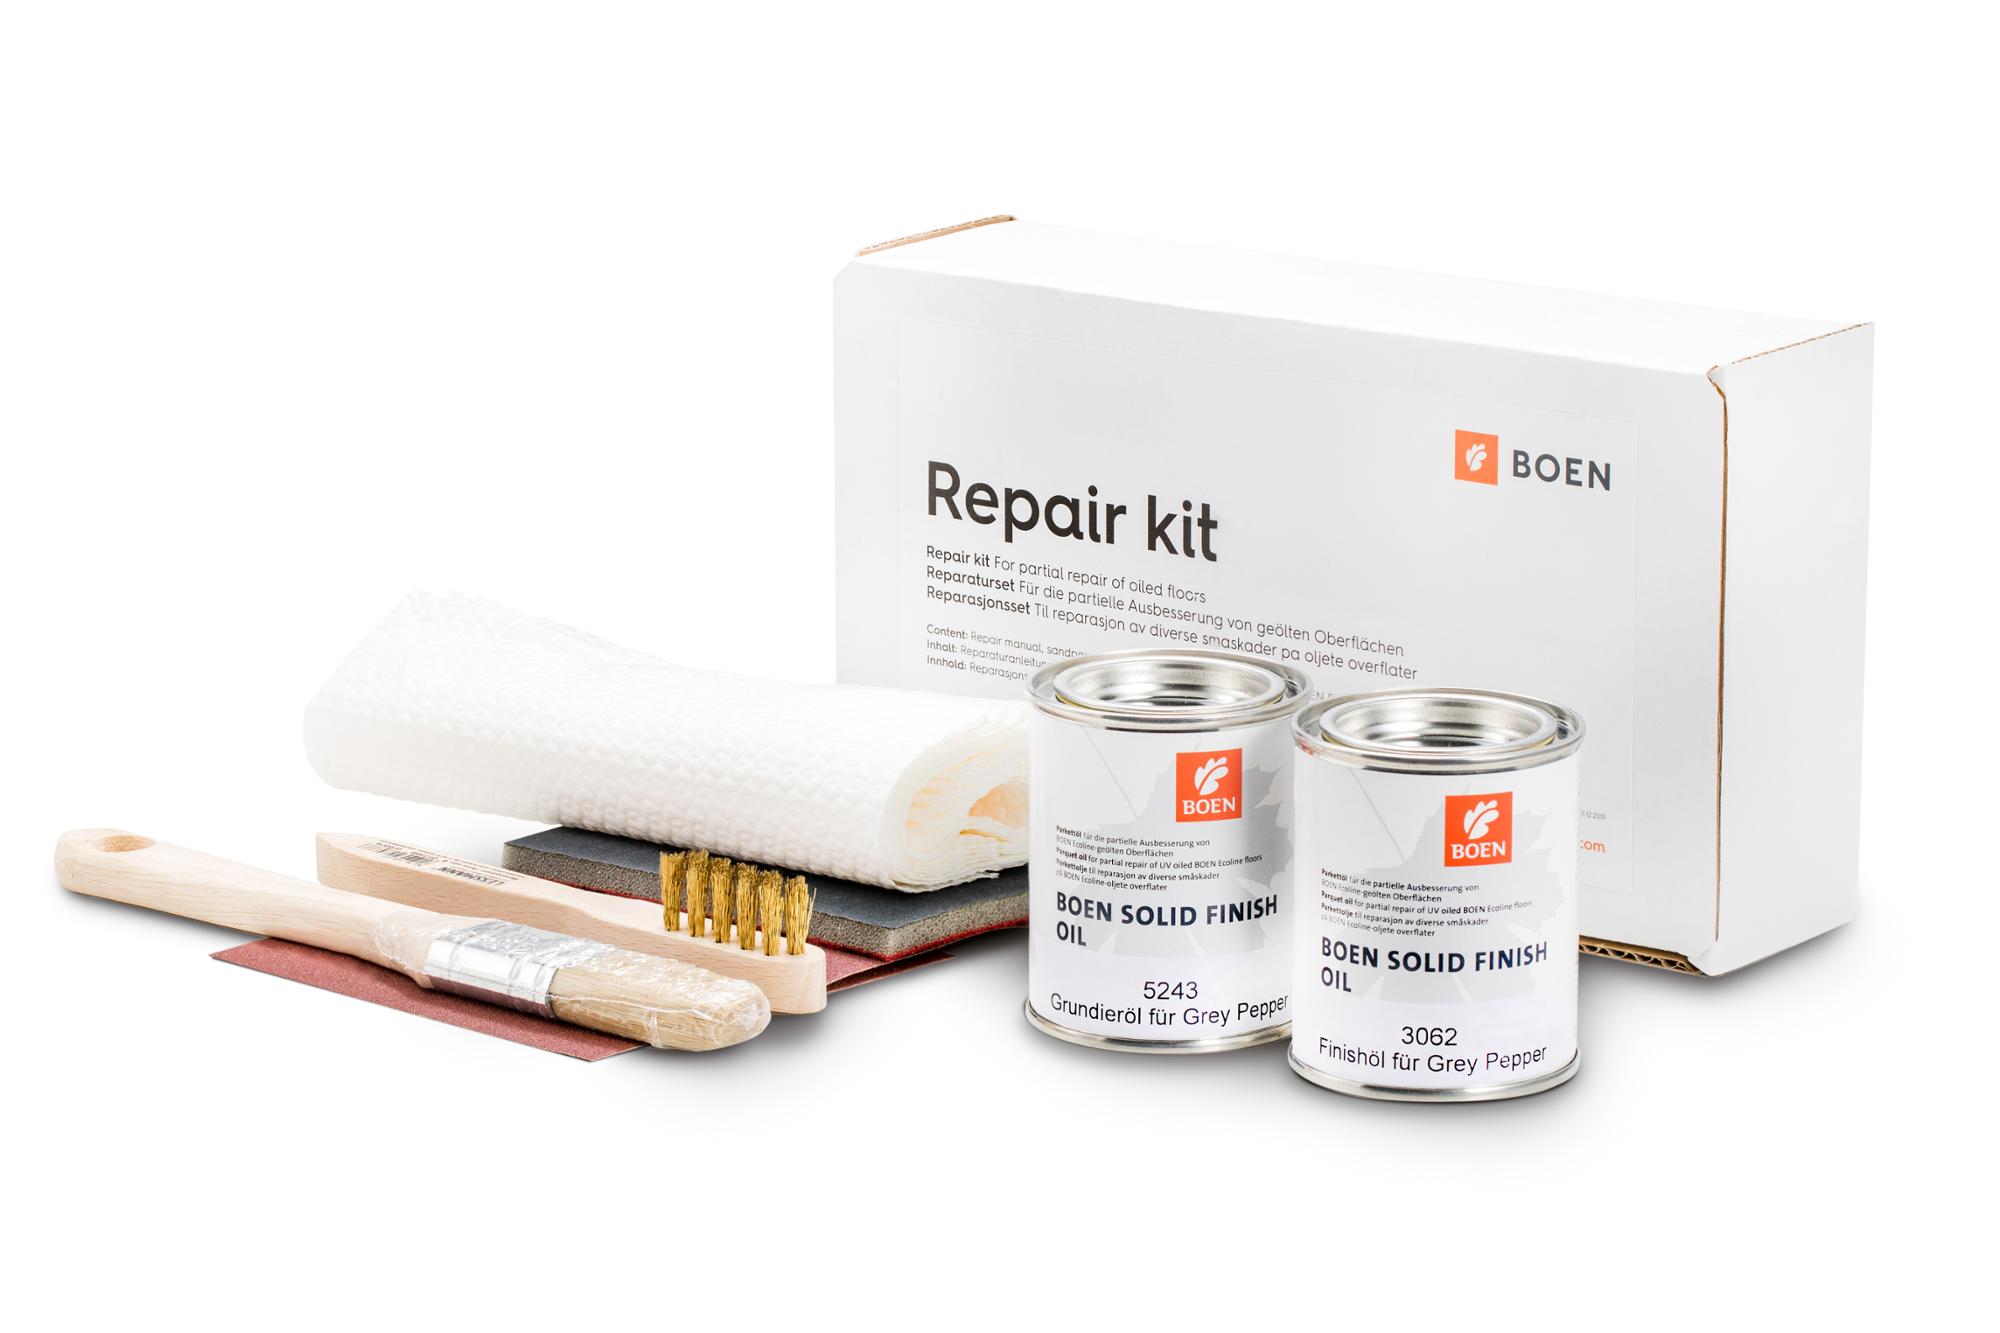 BOEN kit riparazione per Rovere Grey Pepper

For the partial repair of natural oiled surfaces.
Content: Repair instruction, abrasive paper P 150,
abrasive web P 360, 0,125 l BOEN Live Natural Oil,
paint brush, cleaning cloths.